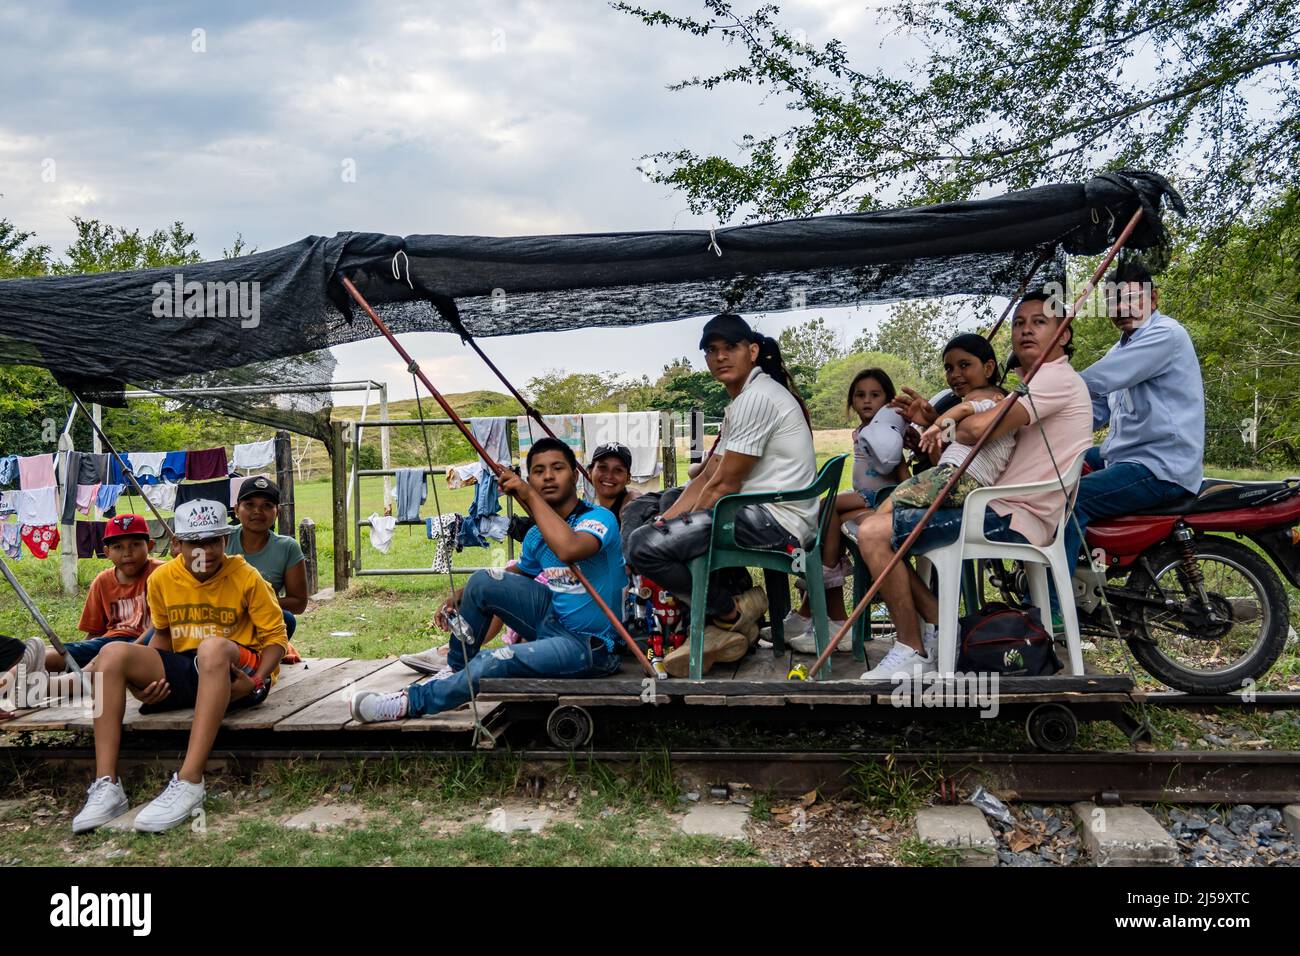 Brujita, a wooden cart driven by a motorcycle, transports passengers on rail road track. Colombia, South America. Stock Photo